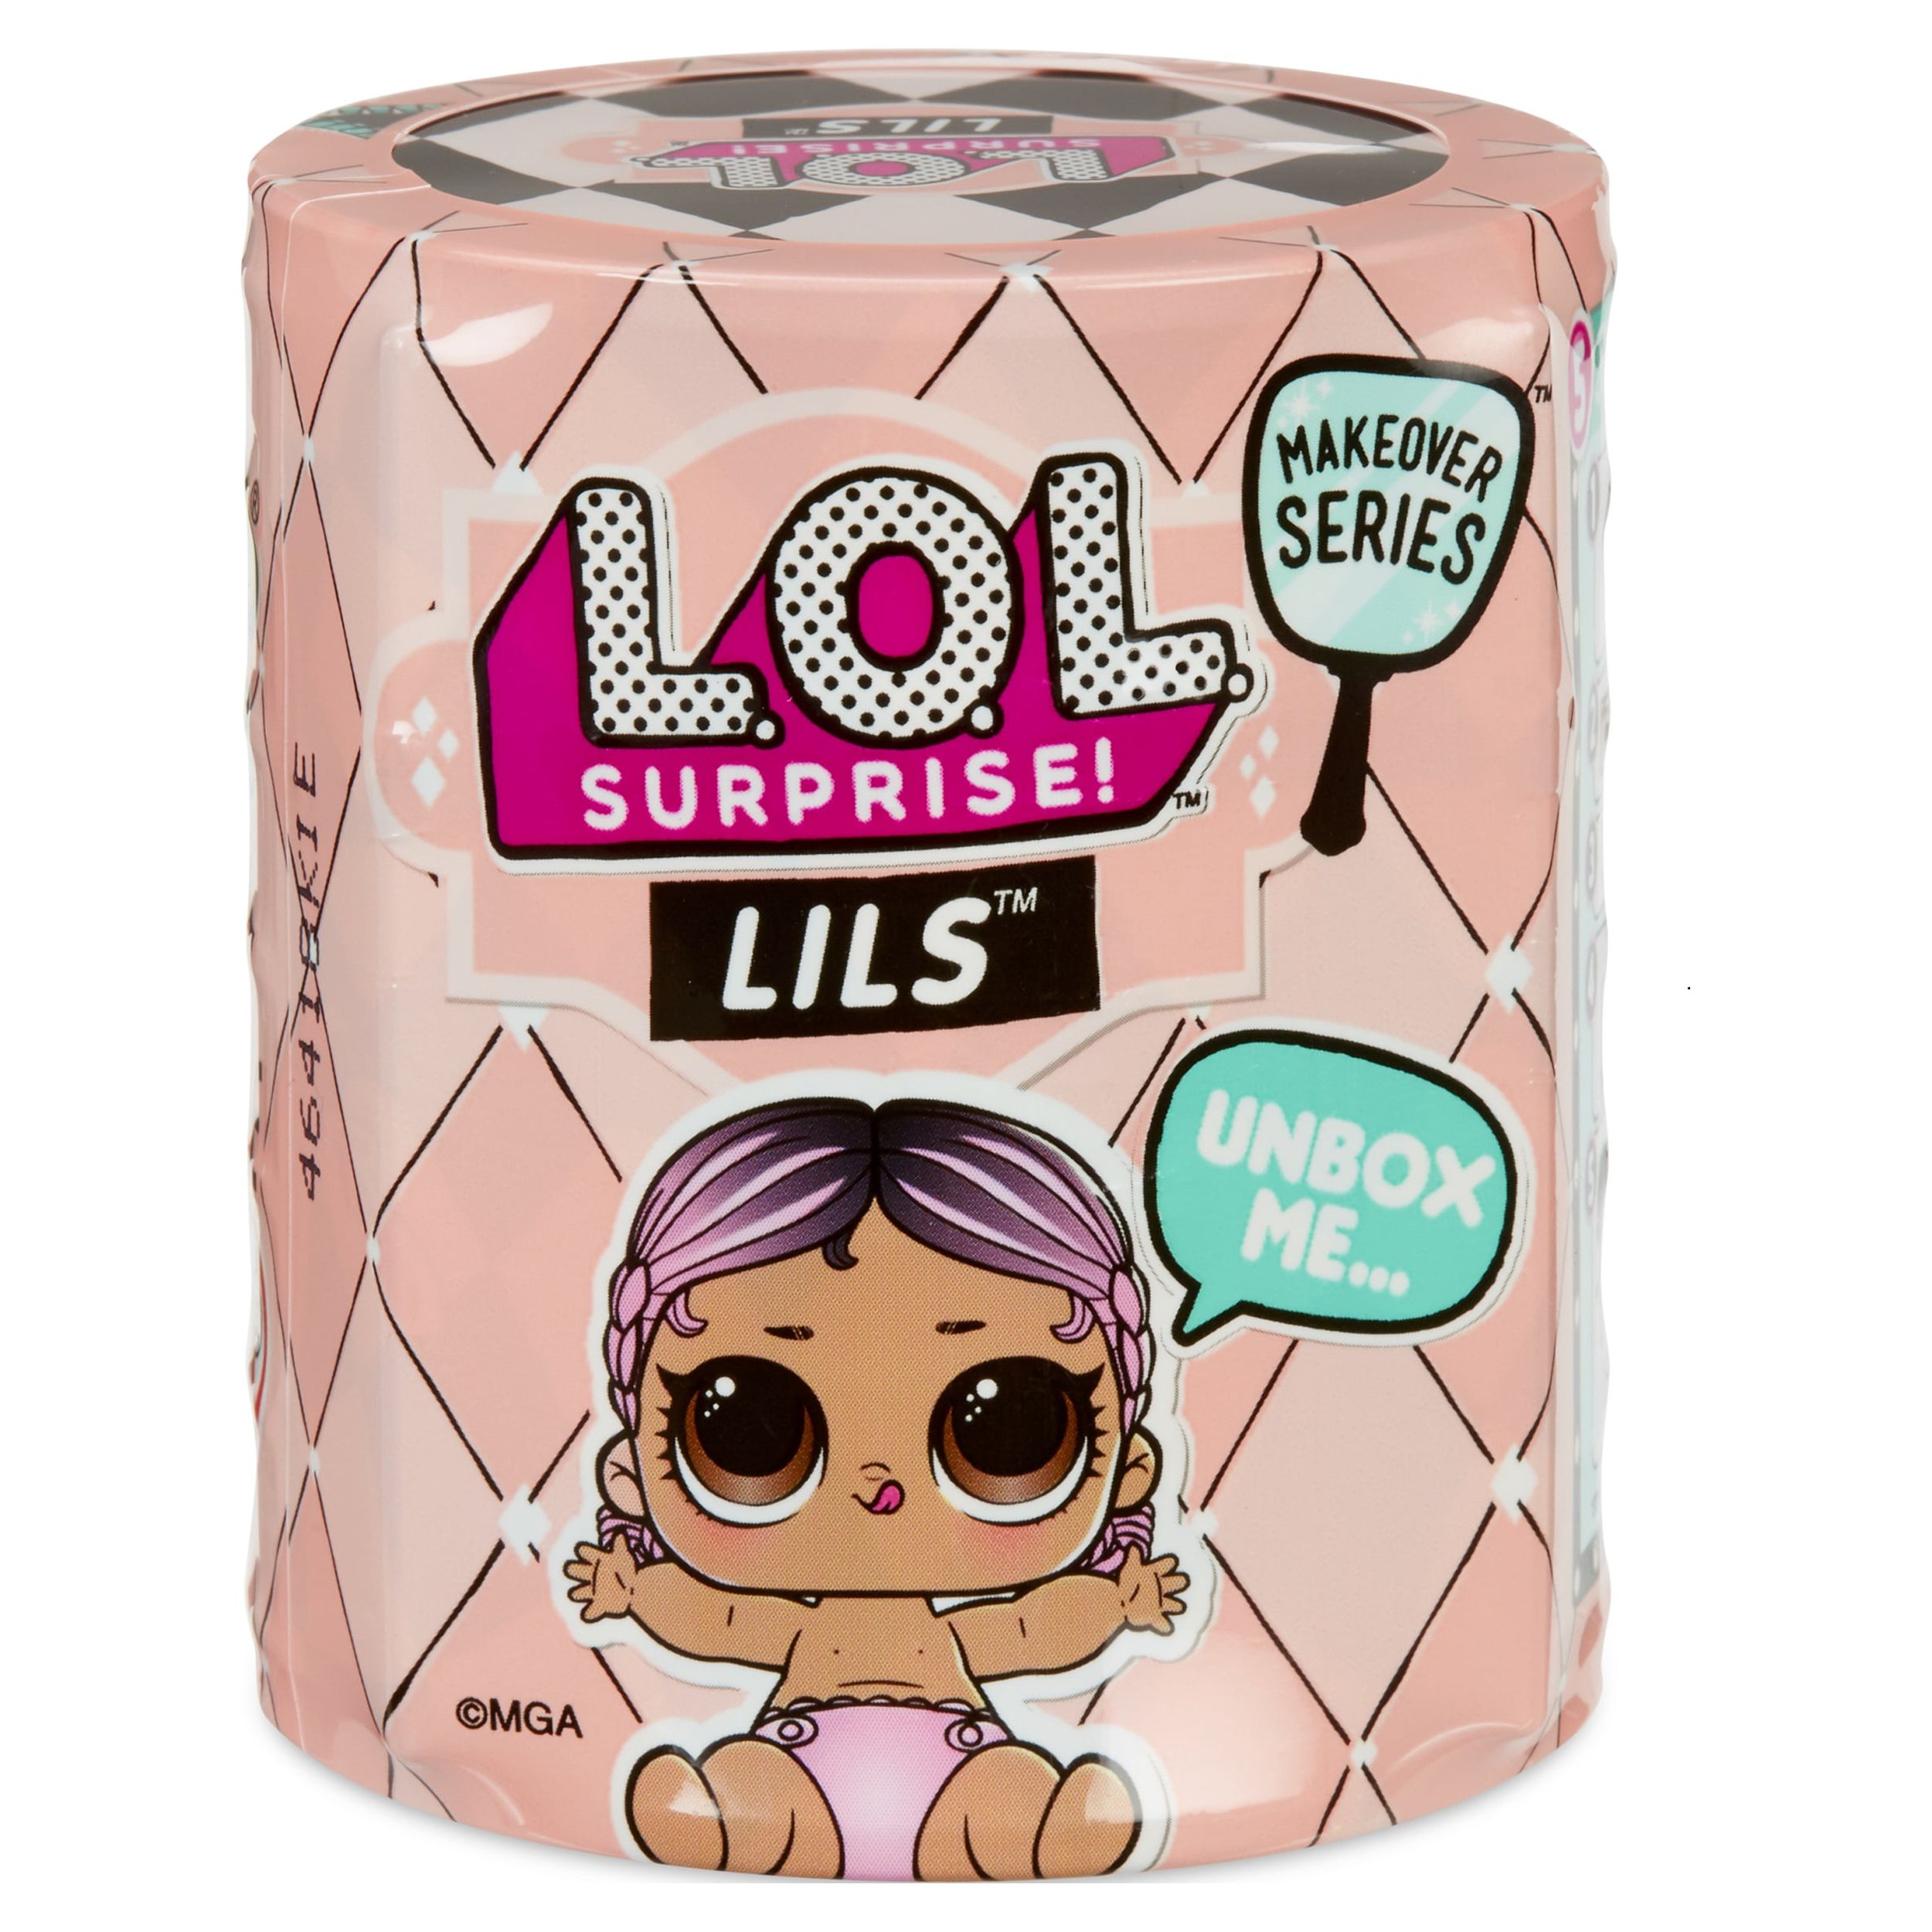 LOL Surprise Lils With Lil Pets, Sisters or Brothers, Great Gift for Kids Ages 4 5 6+ - image 1 of 6